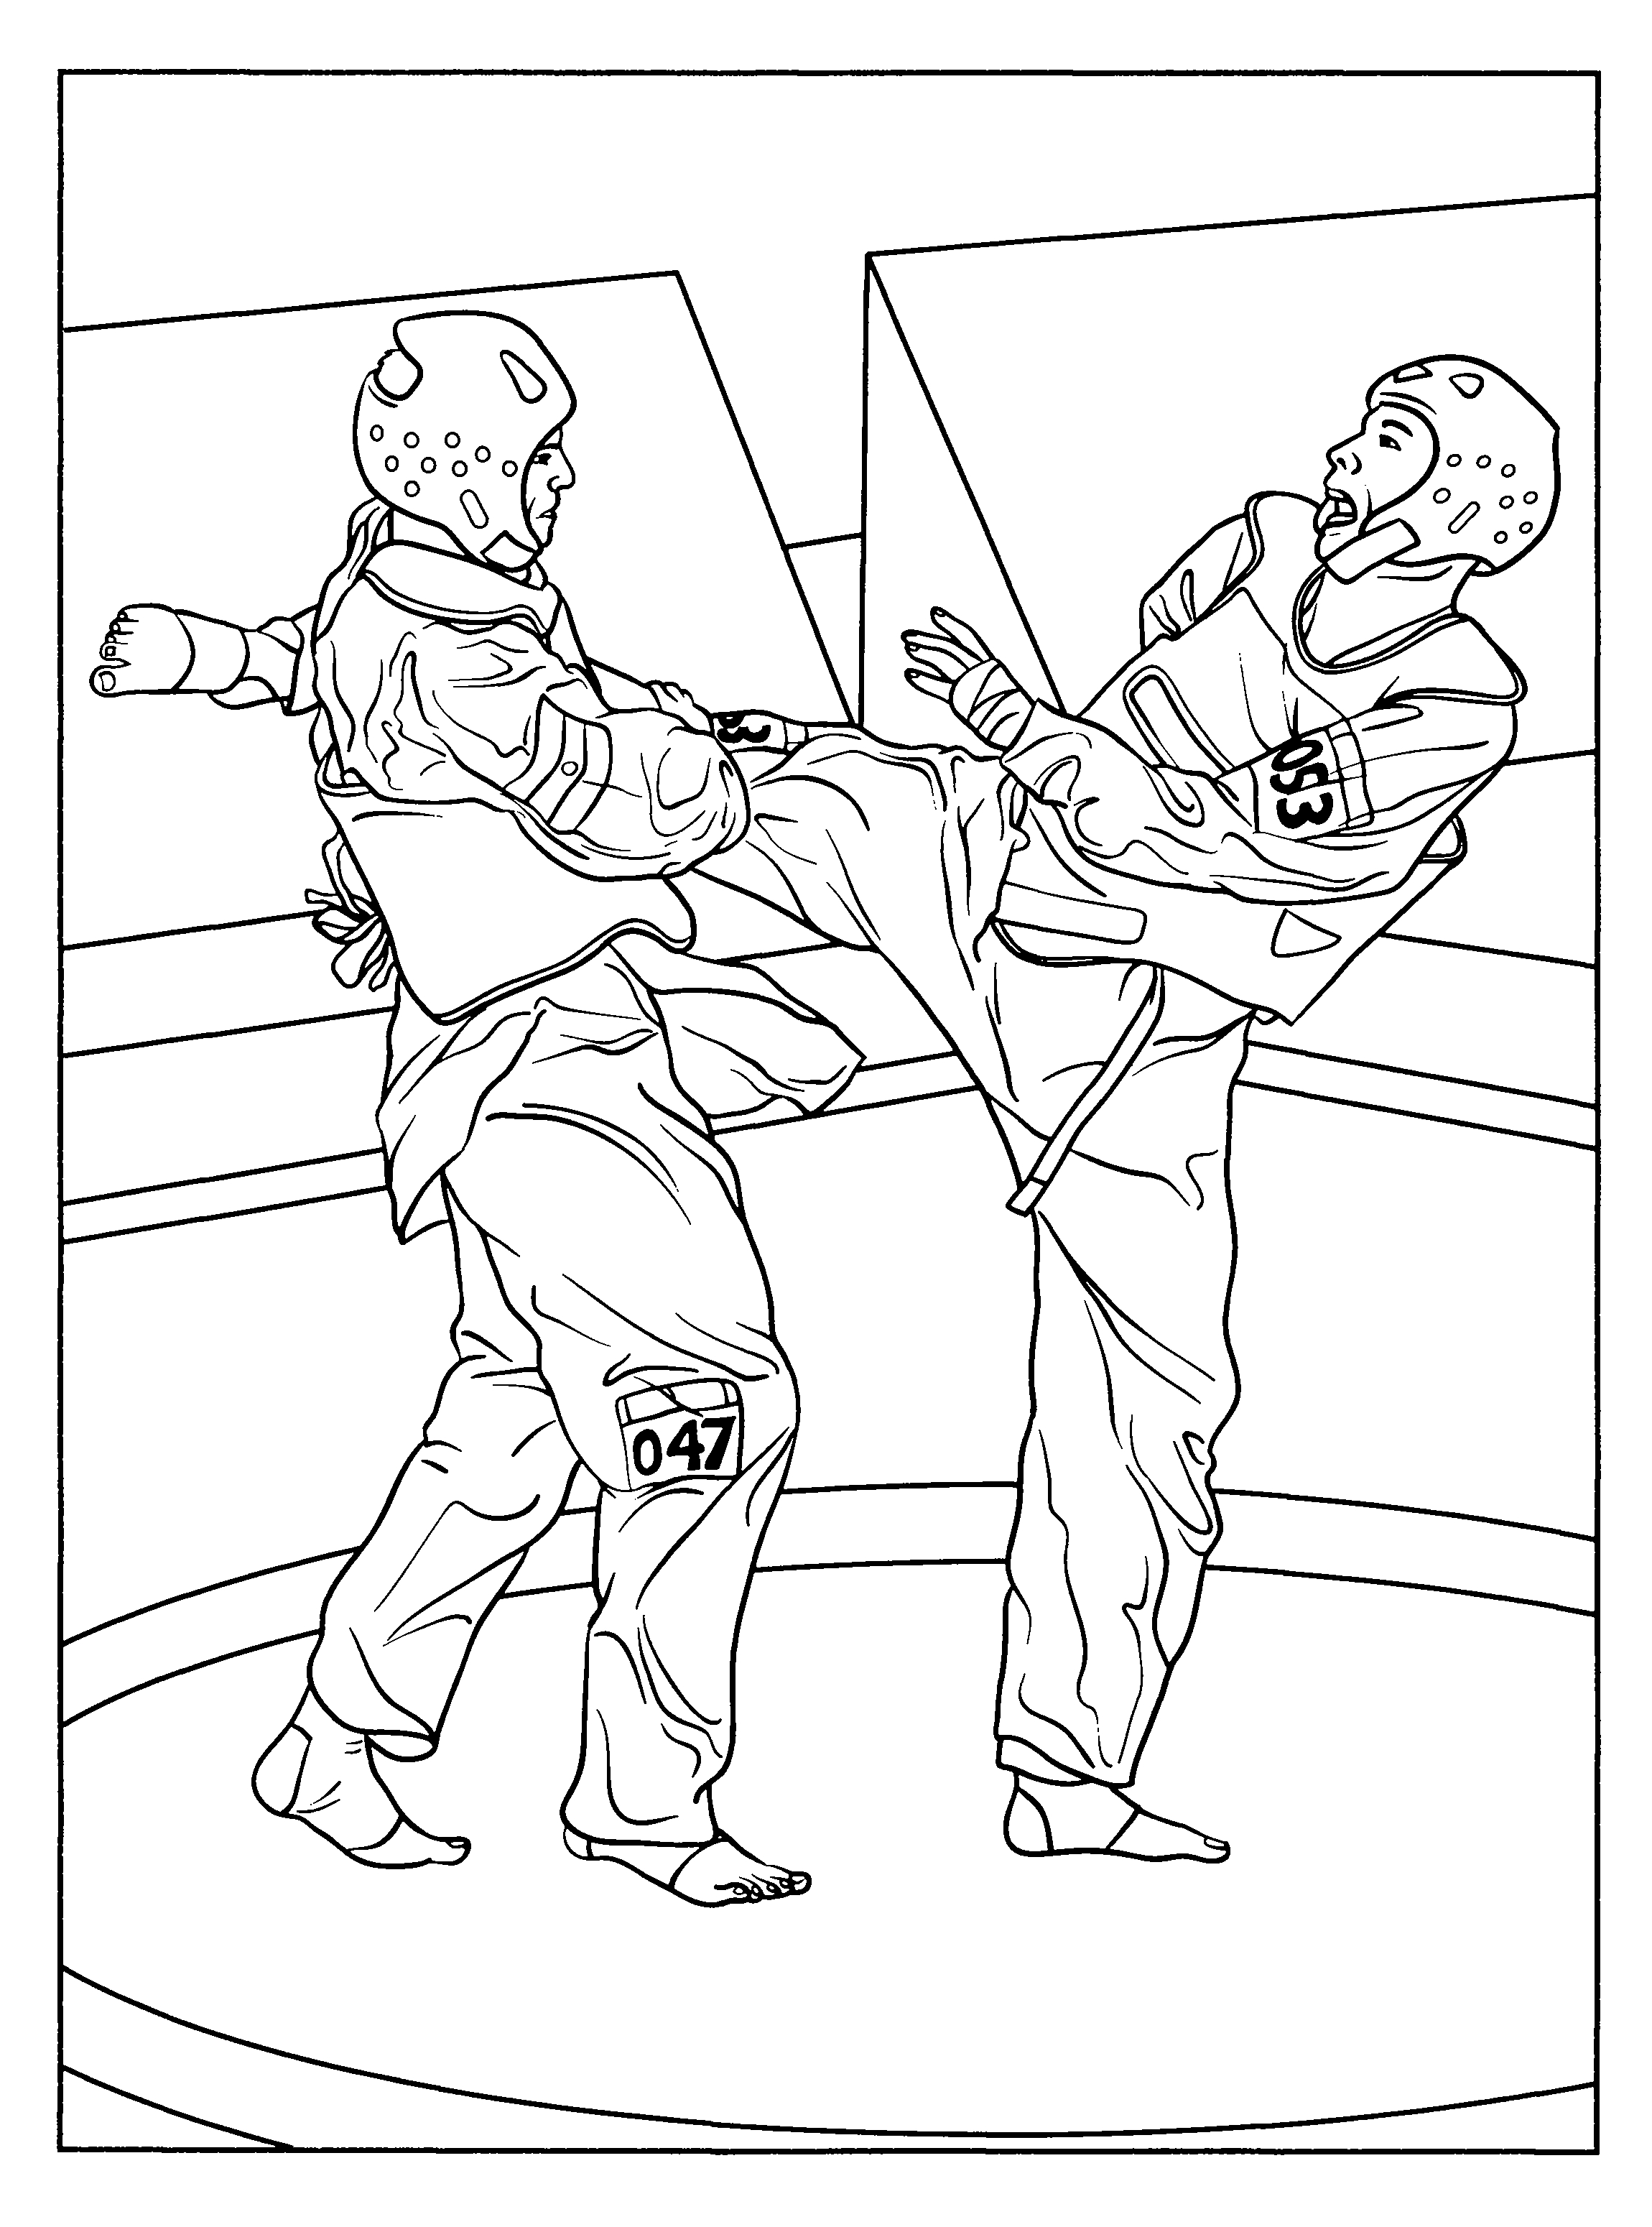 Karate Coloring Pages For Kids | Coloring Pages | Karate School - Free Printable Karate Coloring Pages